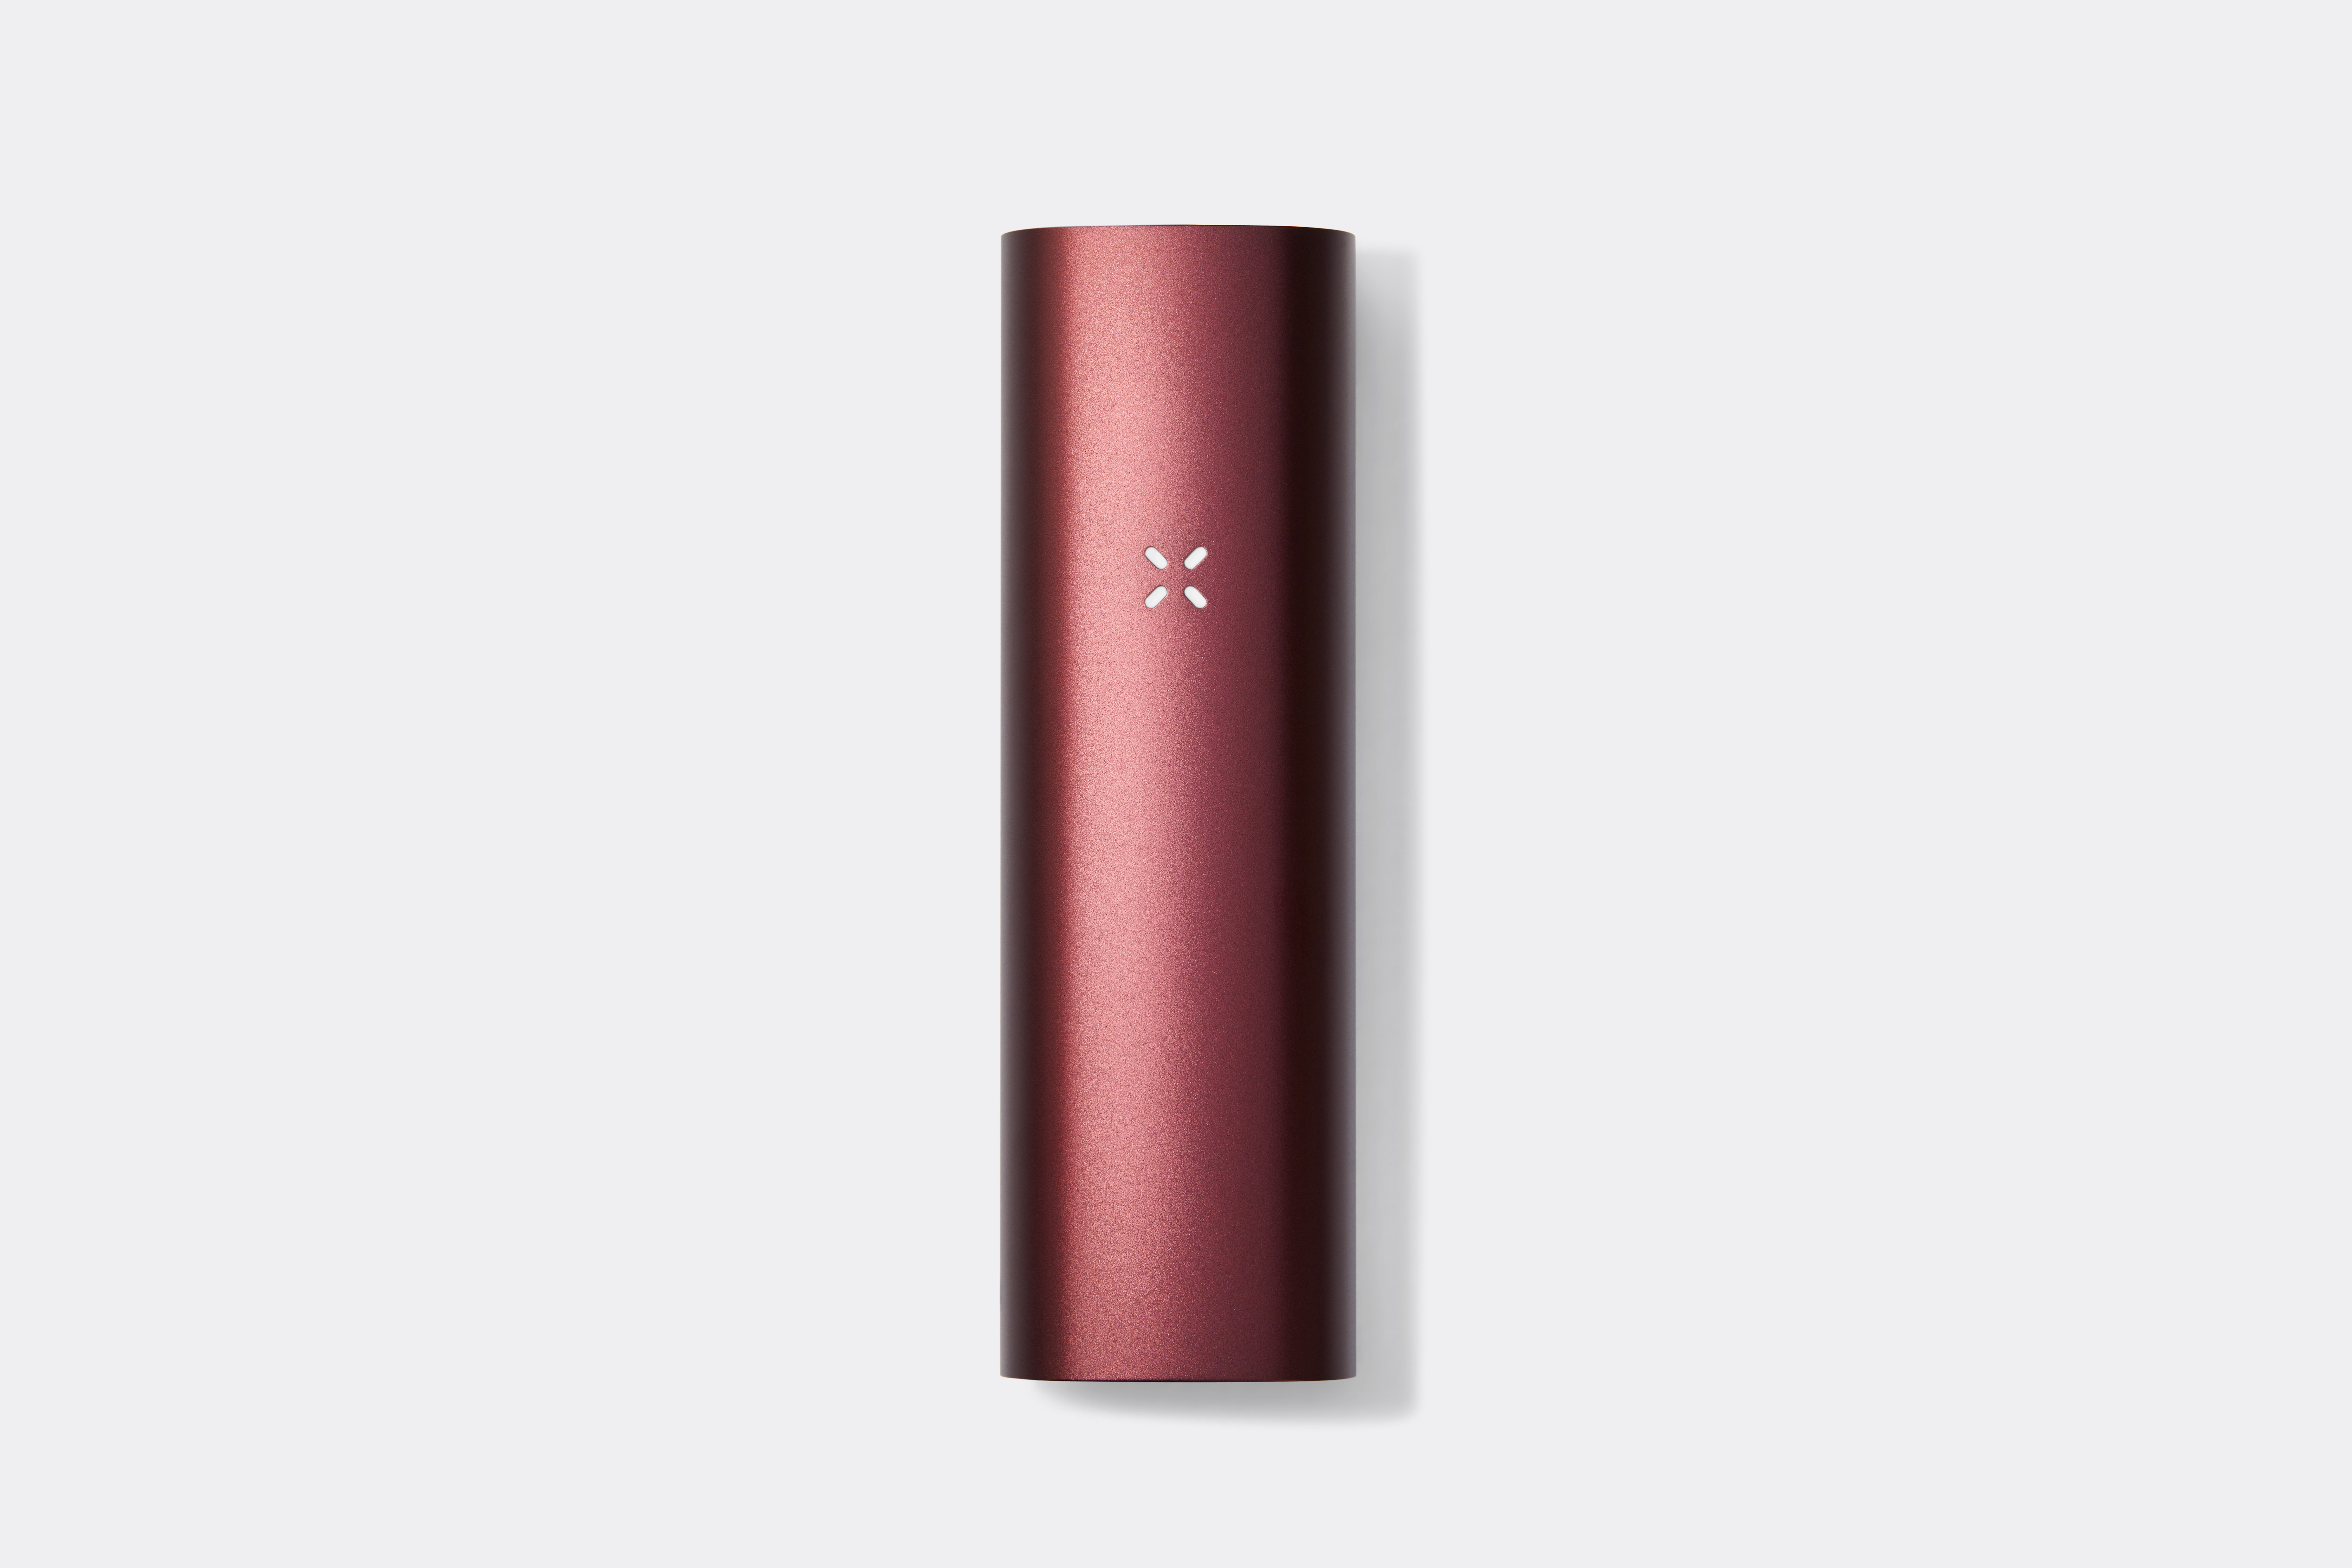 A photograph of Pax 3 Basic Device (Burgundy)